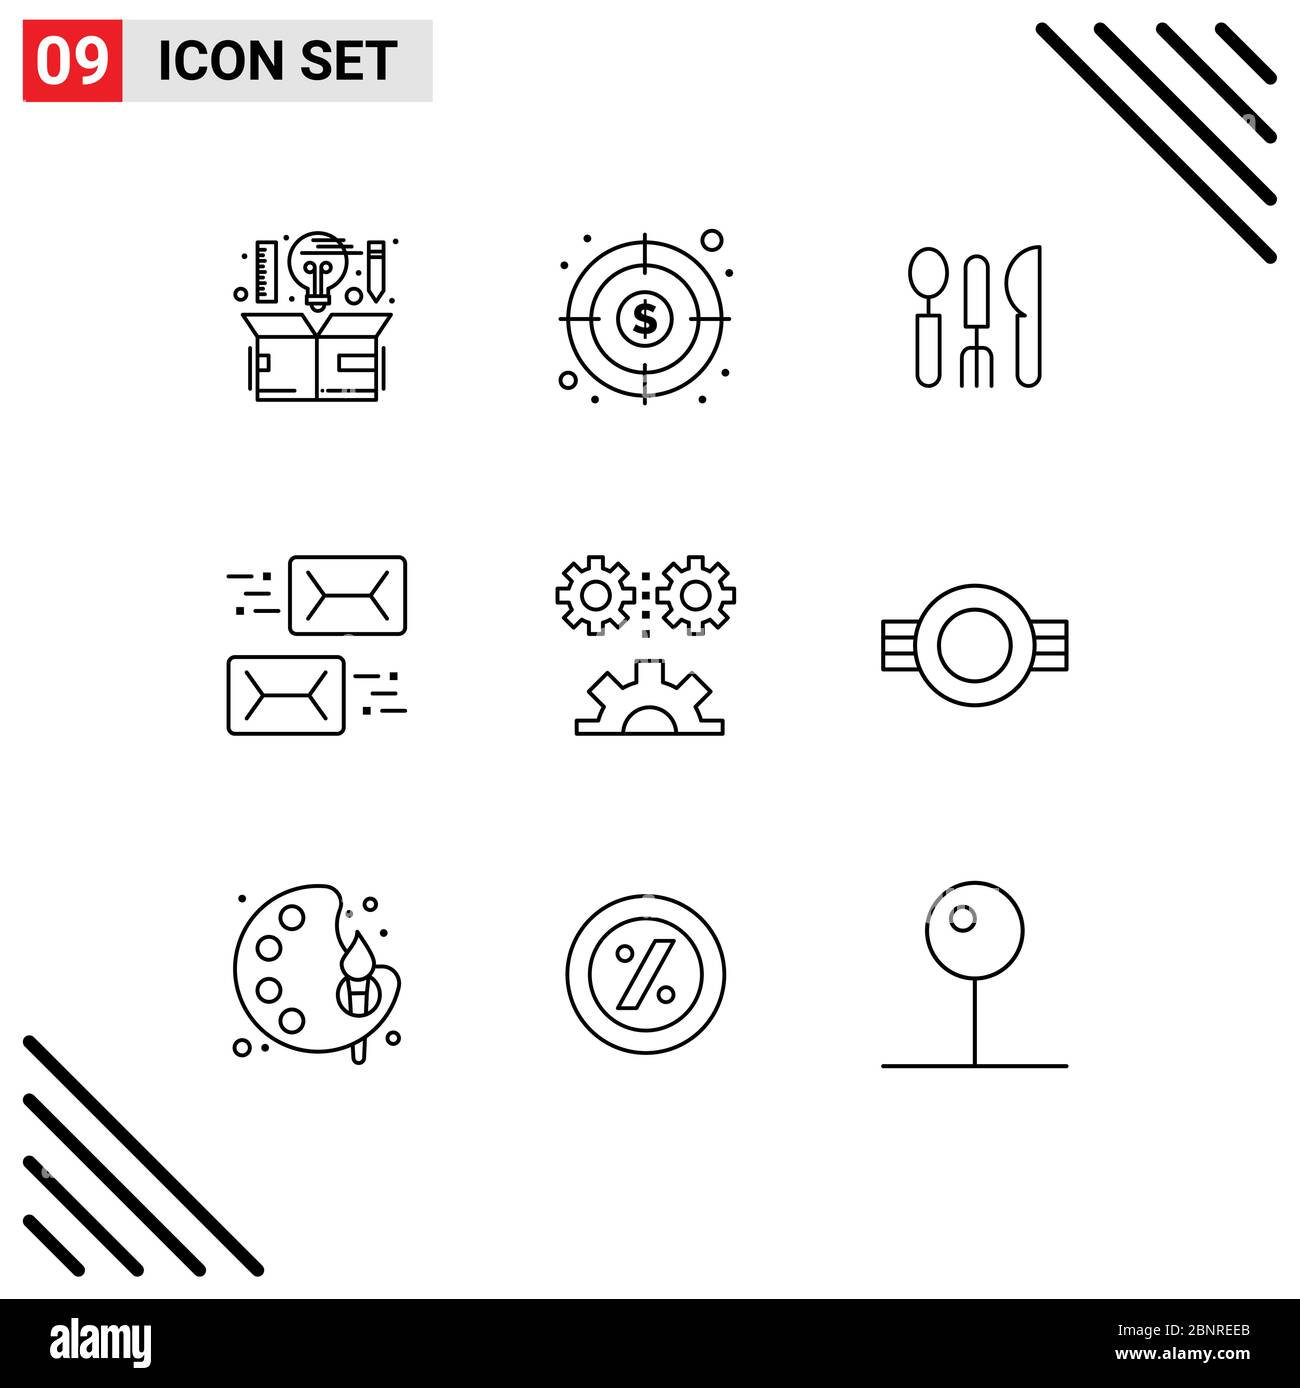 Set of 9 Modern UI Icons Symbols Signs for mail, email, goal, communication, travel Editable Vector Design Elements Stock Vector